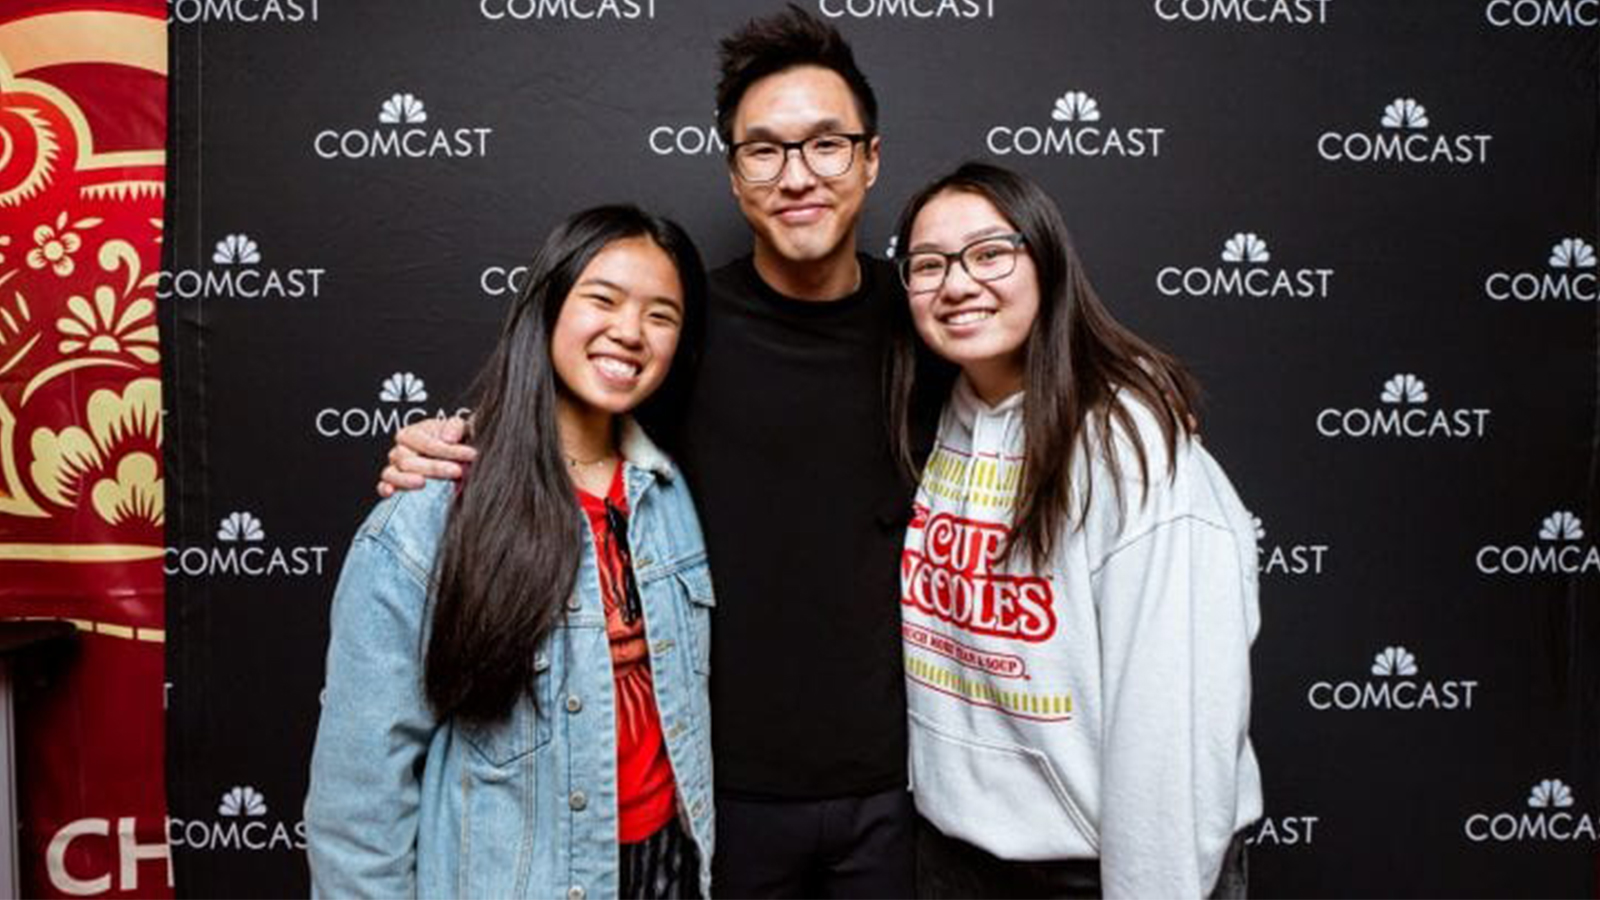 Wesley Chan in front of a Comcast branded backdrop with fans.